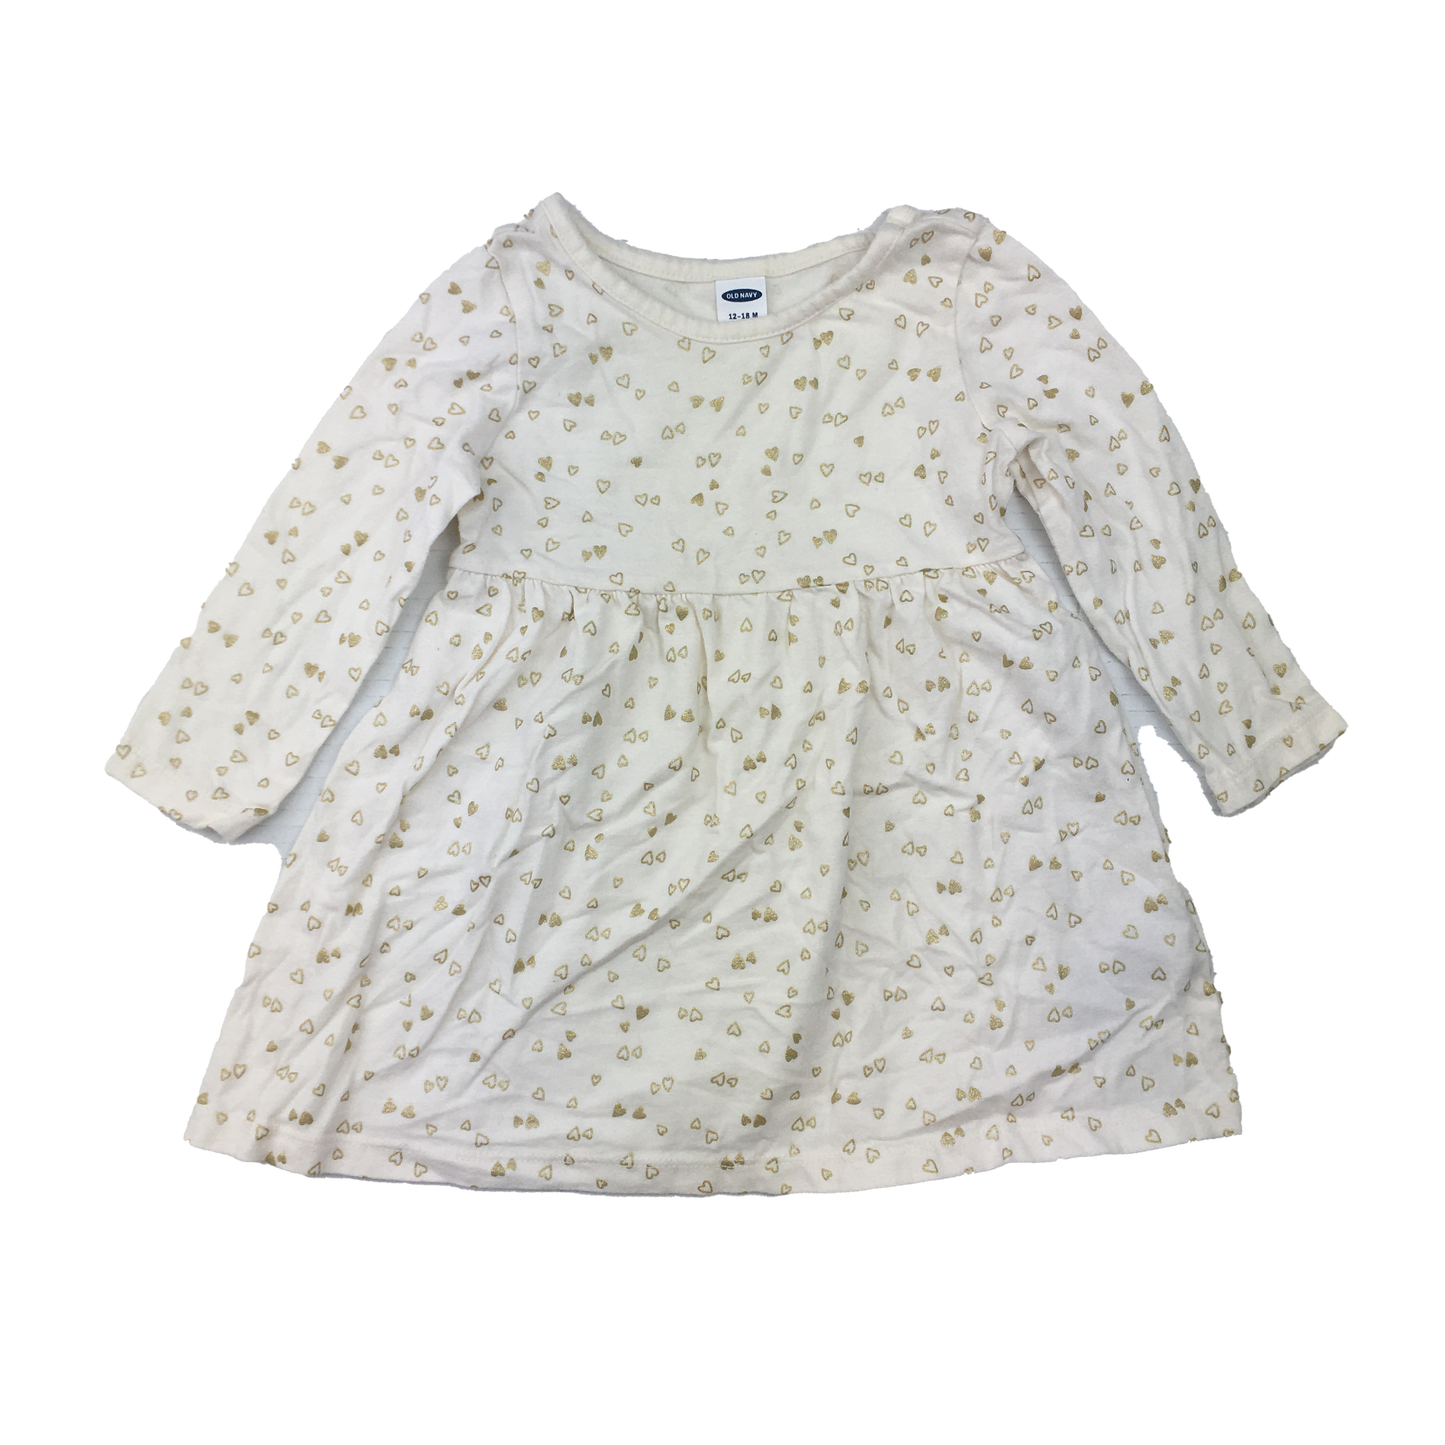 Old Navy White Dress with Gold Hearts 12-18M